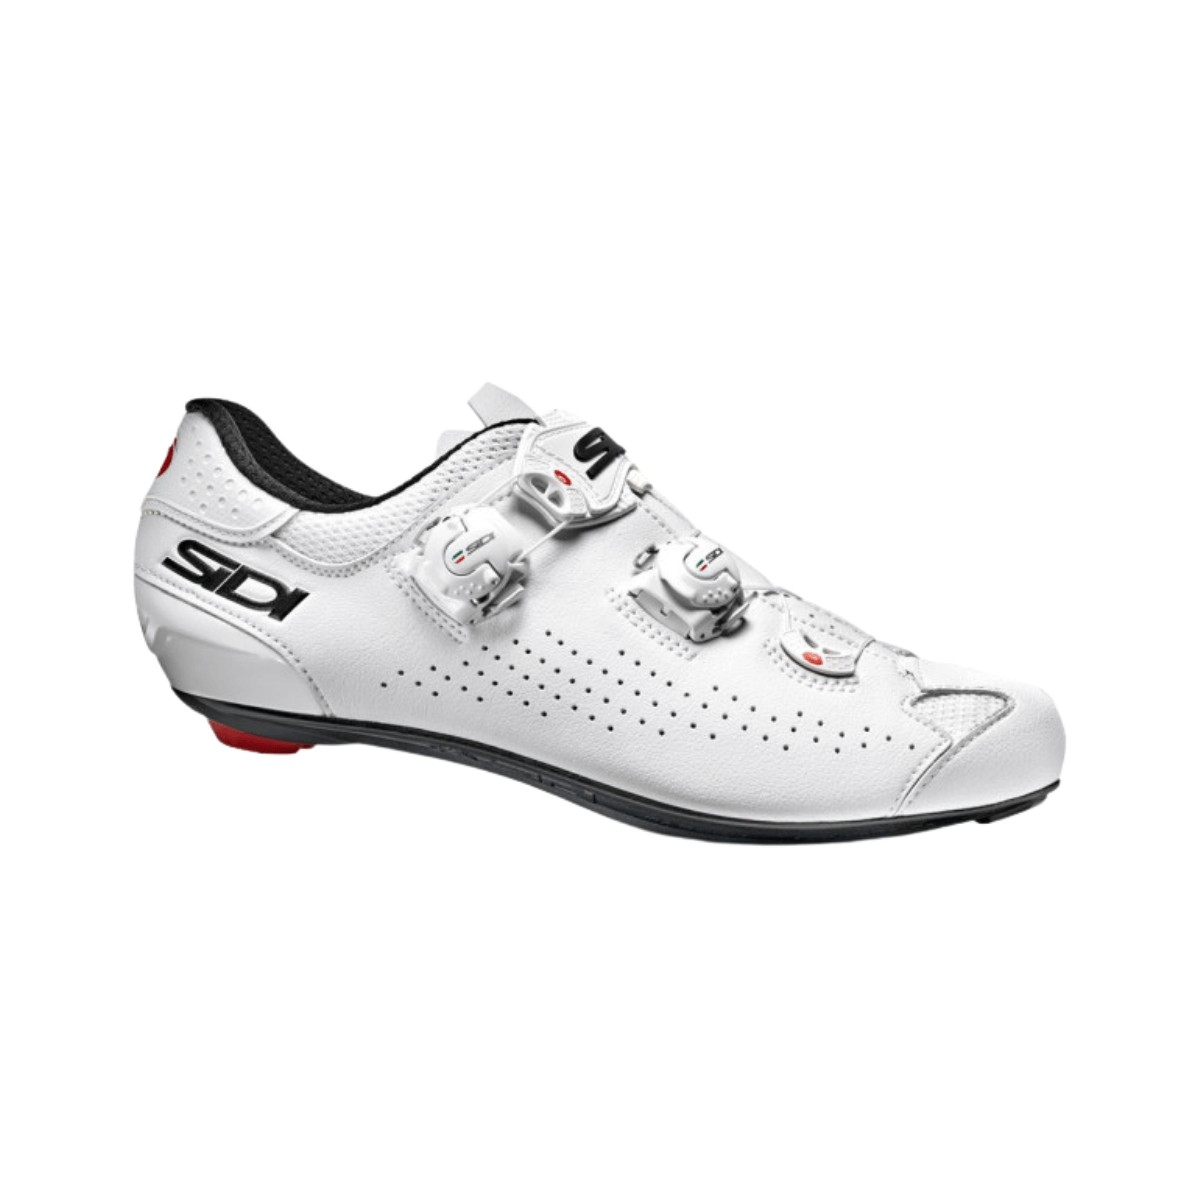 Chaussures Sidi Genius 10 Blanches Femmes, Taille 39 - EUR